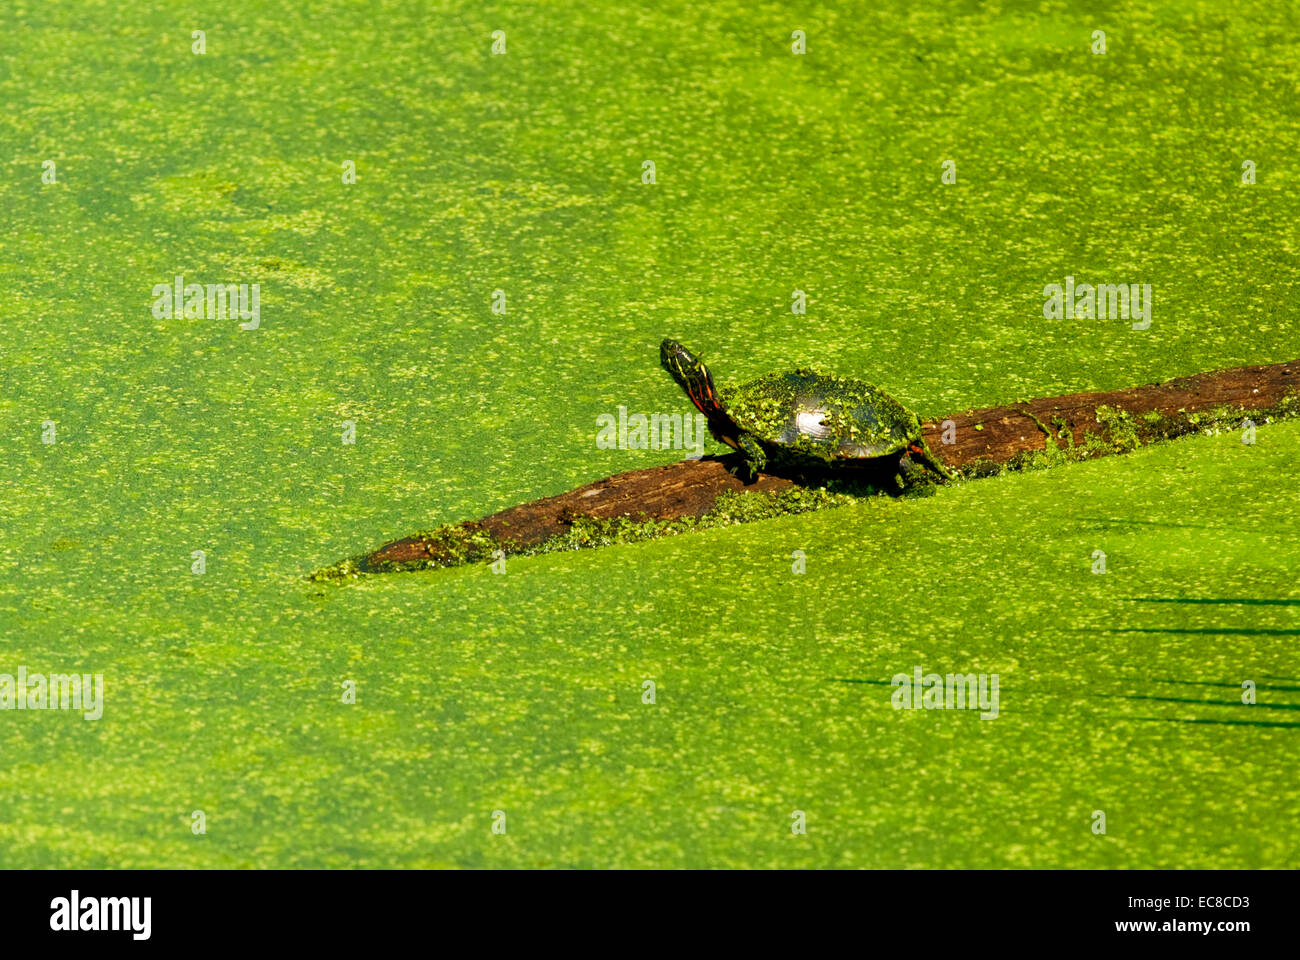 A turtles on a log in a marshland pond. Stock Photo